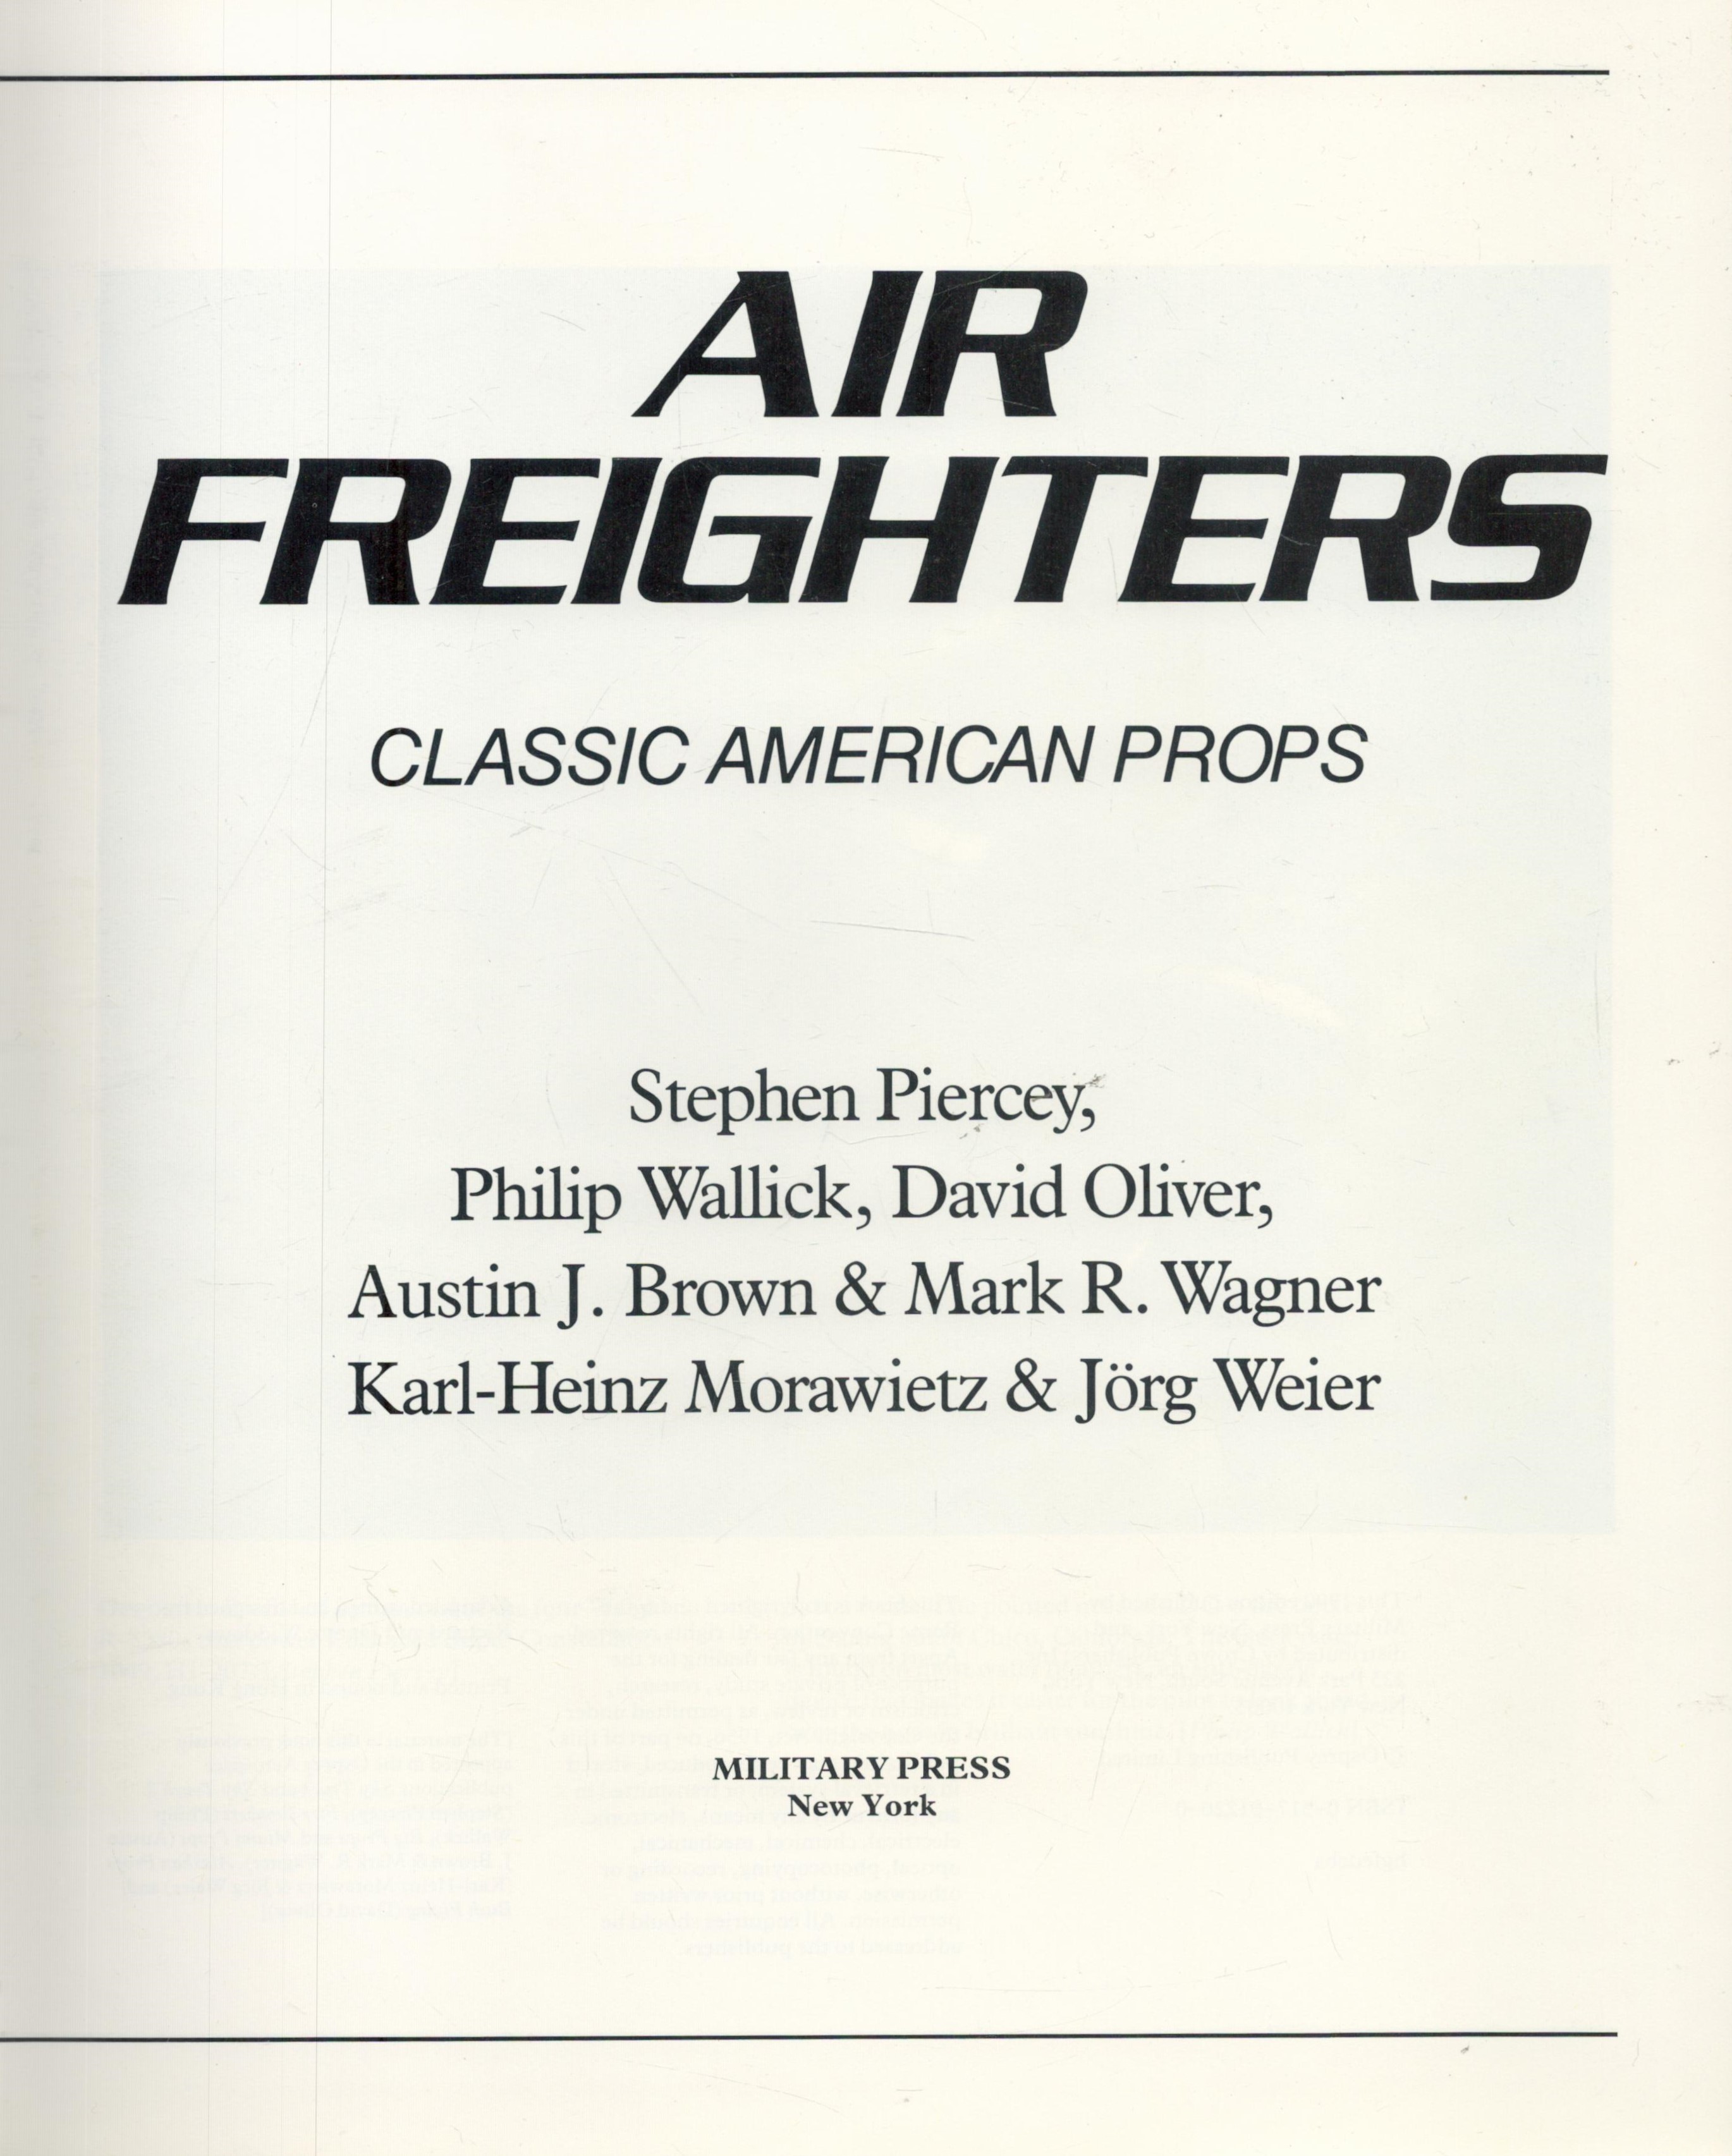 Propeller Driven Aircraft Publications Includes Air Freighters - Classic American Props 1990, - Image 4 of 4